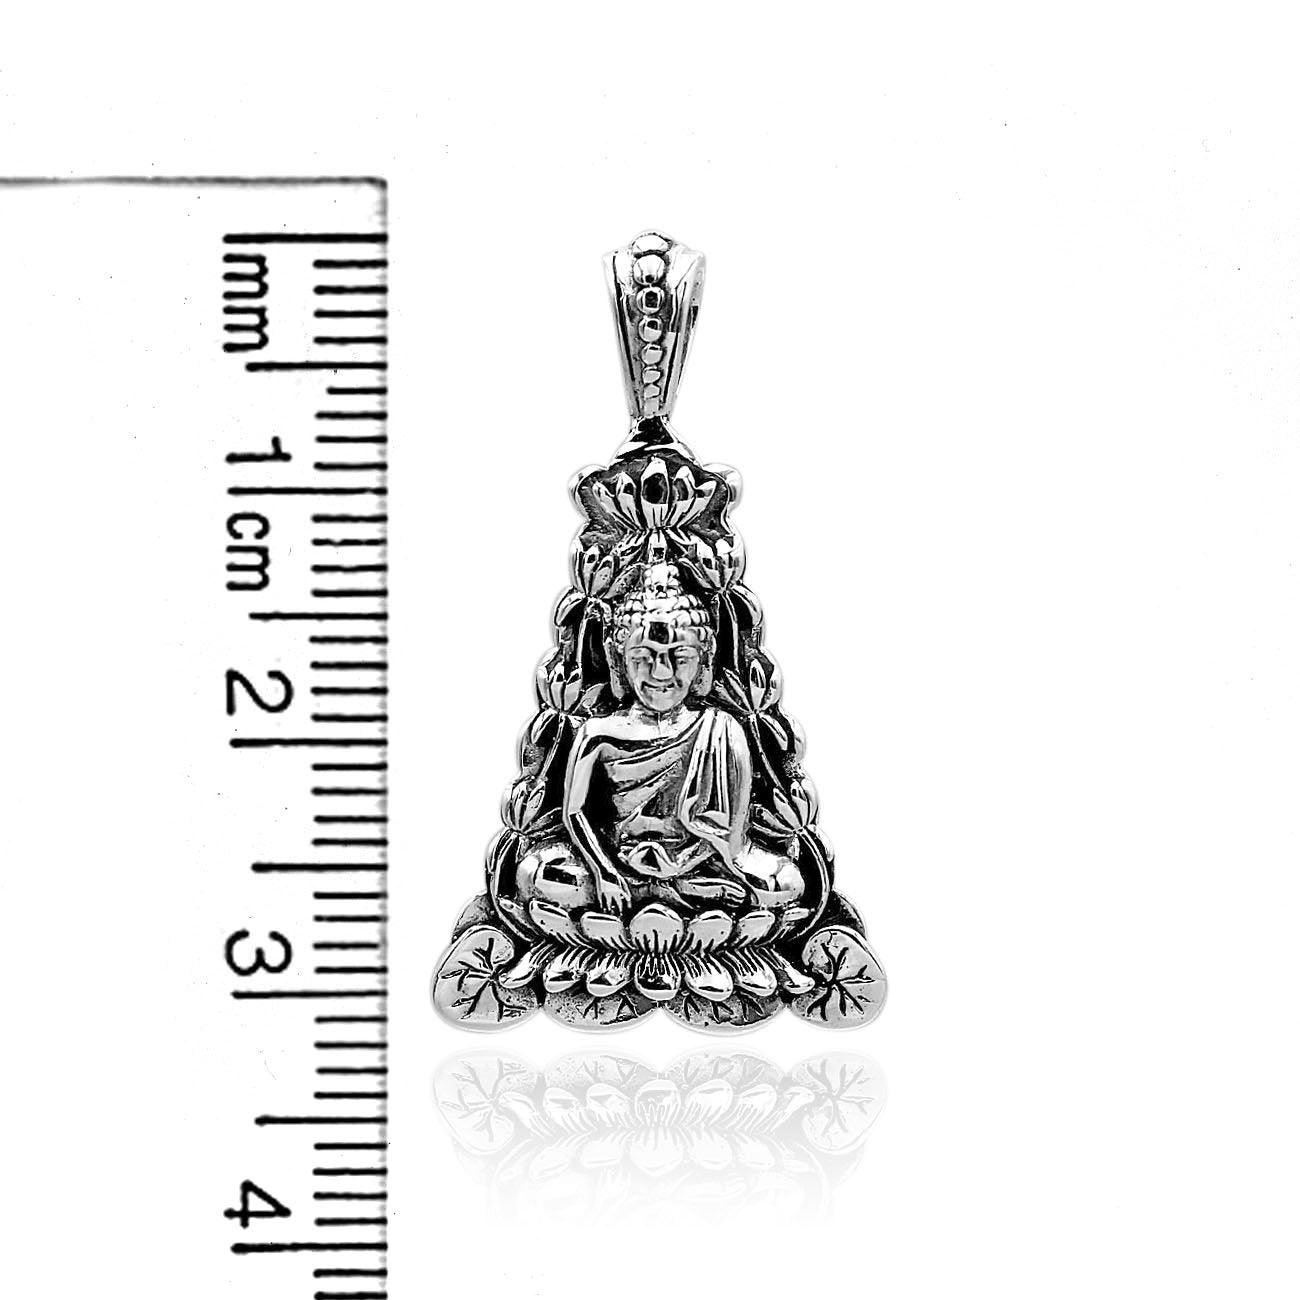 Buddha Meditation Healing Pendant Necklace 925 Sterling Silver with Chain - 3.0 Cm - Inspiring Jewellery